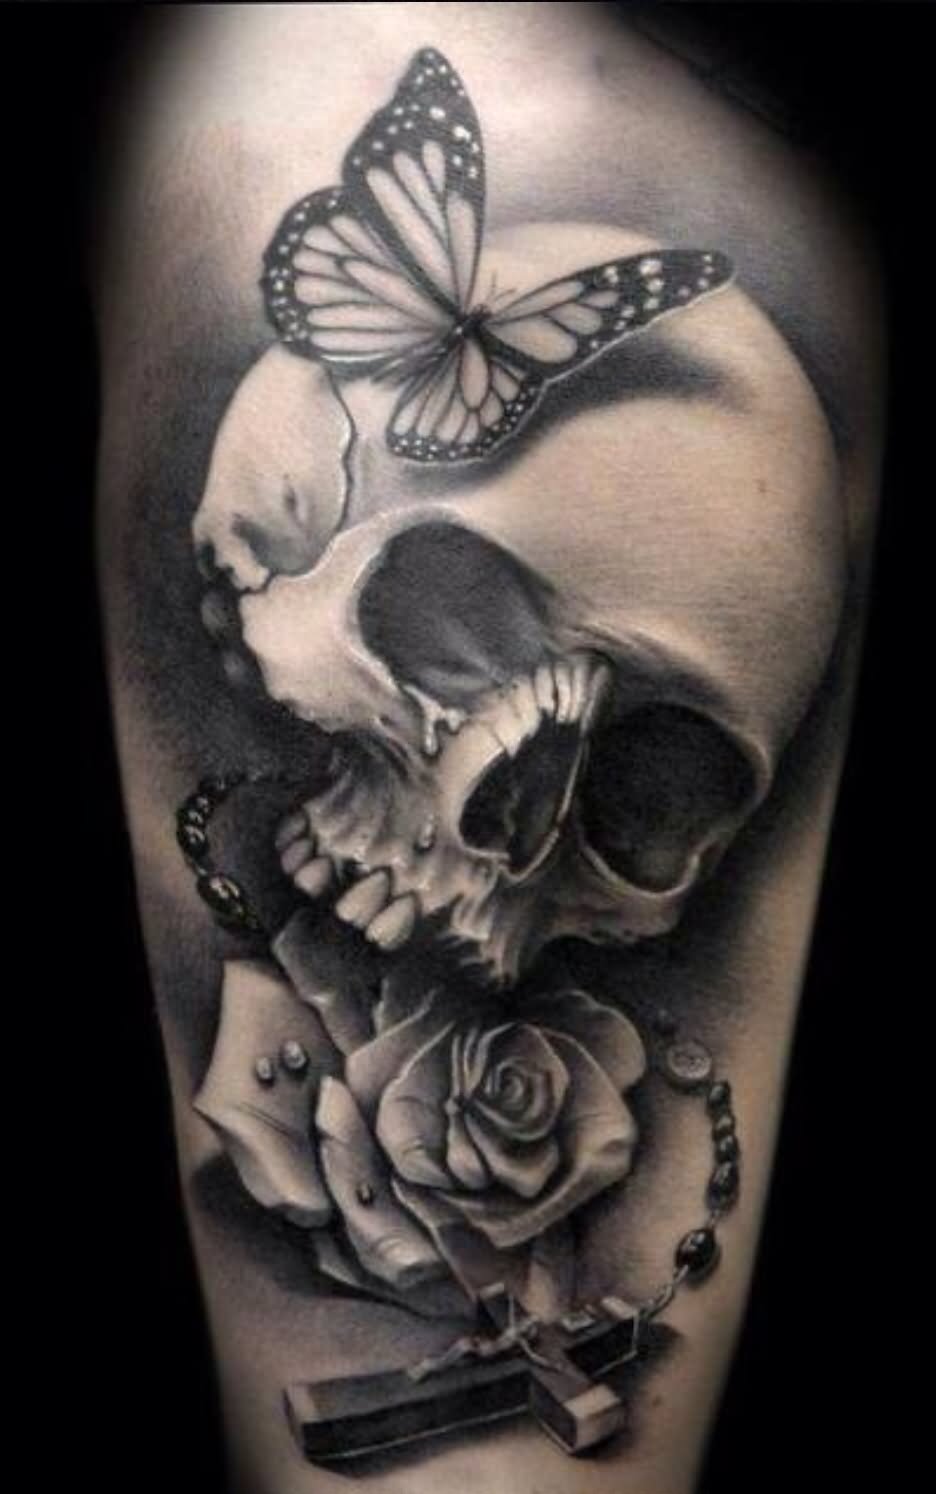 3D Gothic Skull With Rose And Butterfly Tattoo Design For Sleeve